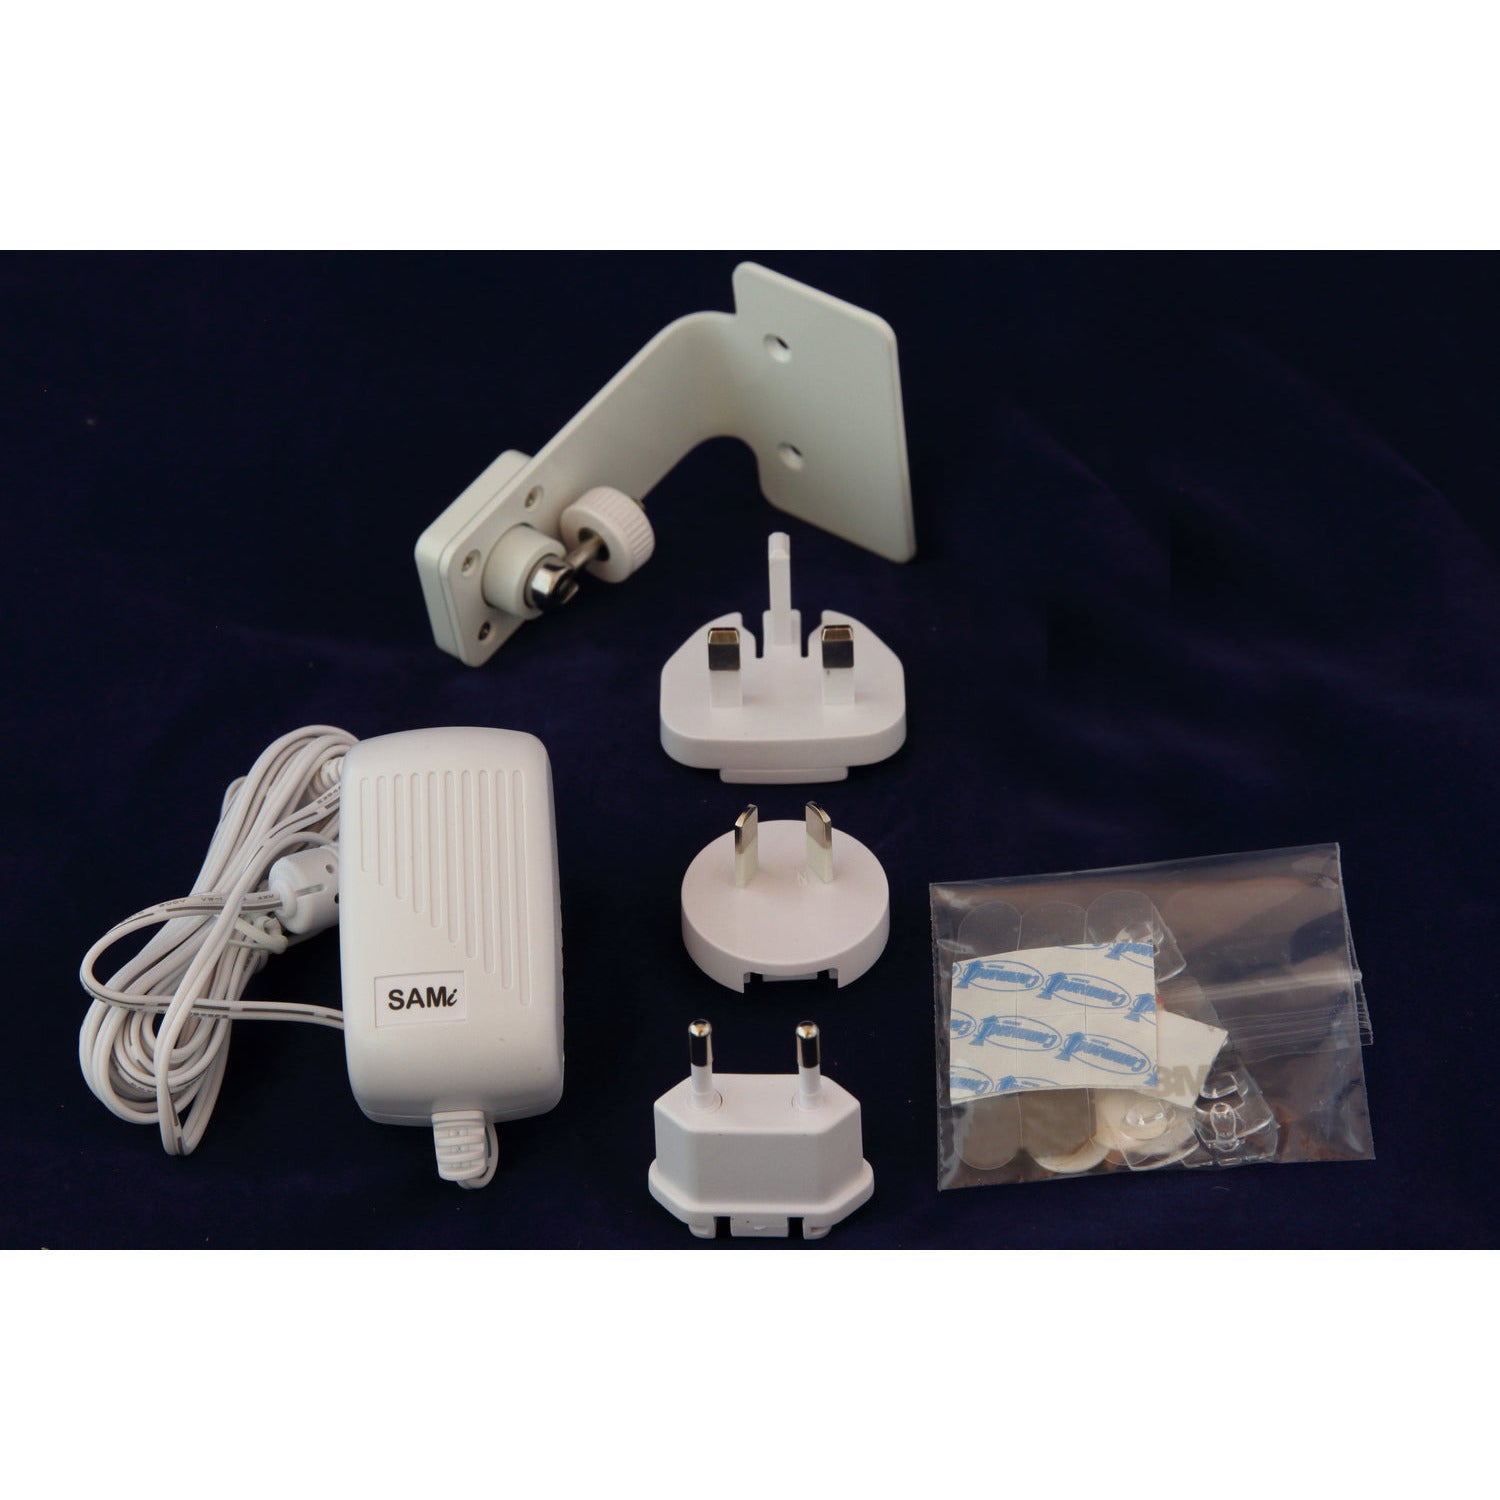 This package contains both the SAMi Bracket/Stand and the AC Adapter, providing all the supplies needed for mounting a camera in a second location, ideal for portability between locations such as a grandparent's house or a holiday home.